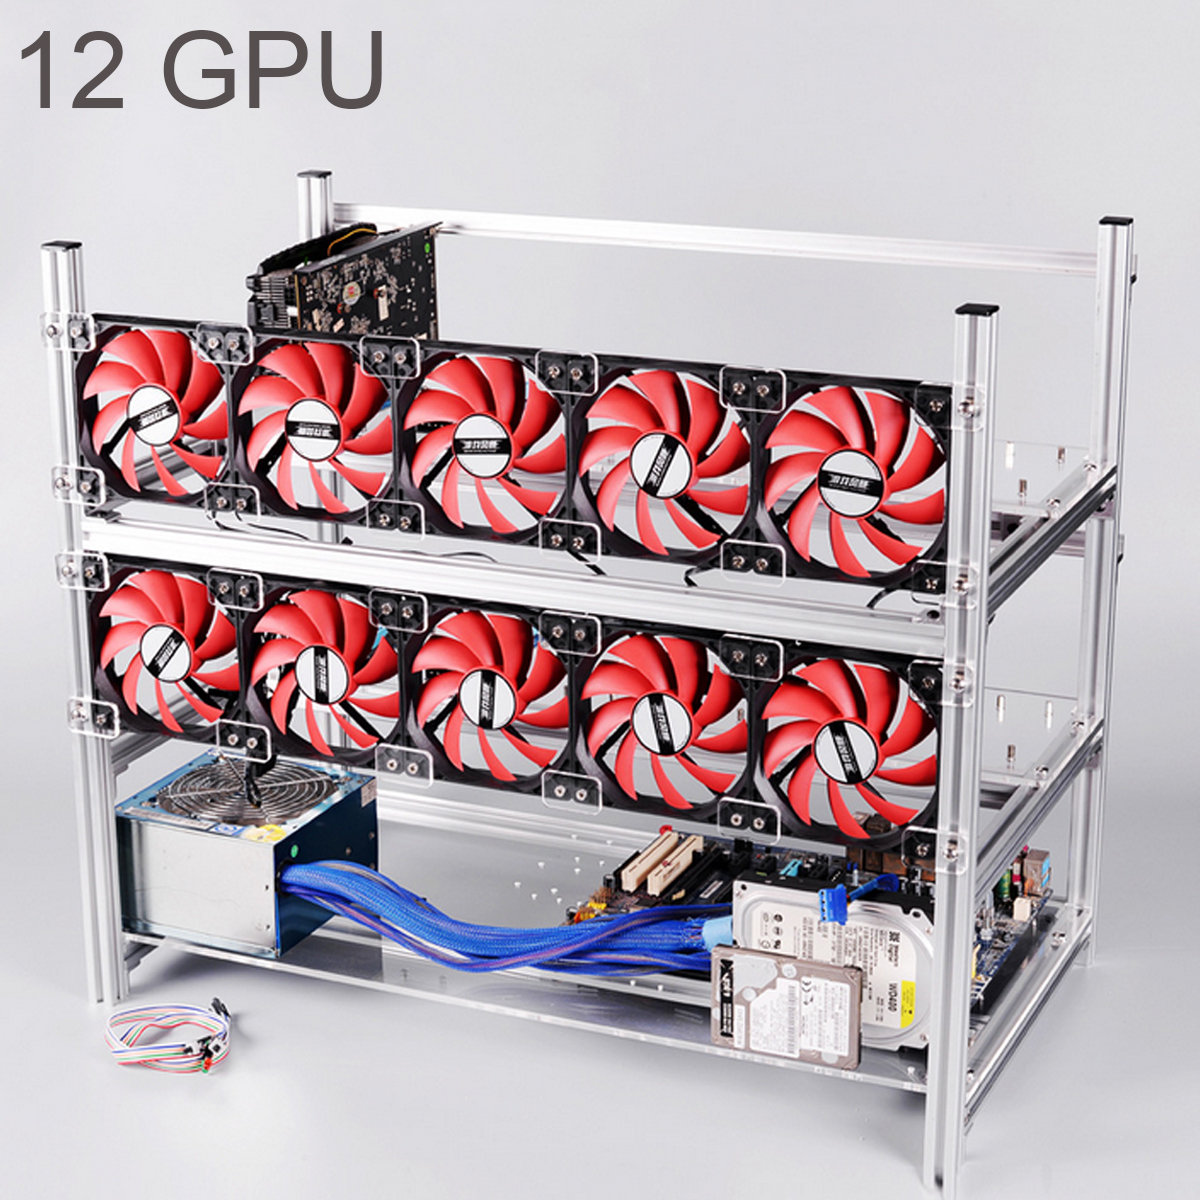 Excellwayreg-Aluminum-Open-Air-Mining-Rig-Stackable-Frame-Case-For-12-GPU-ETH-Ethereum-1208343